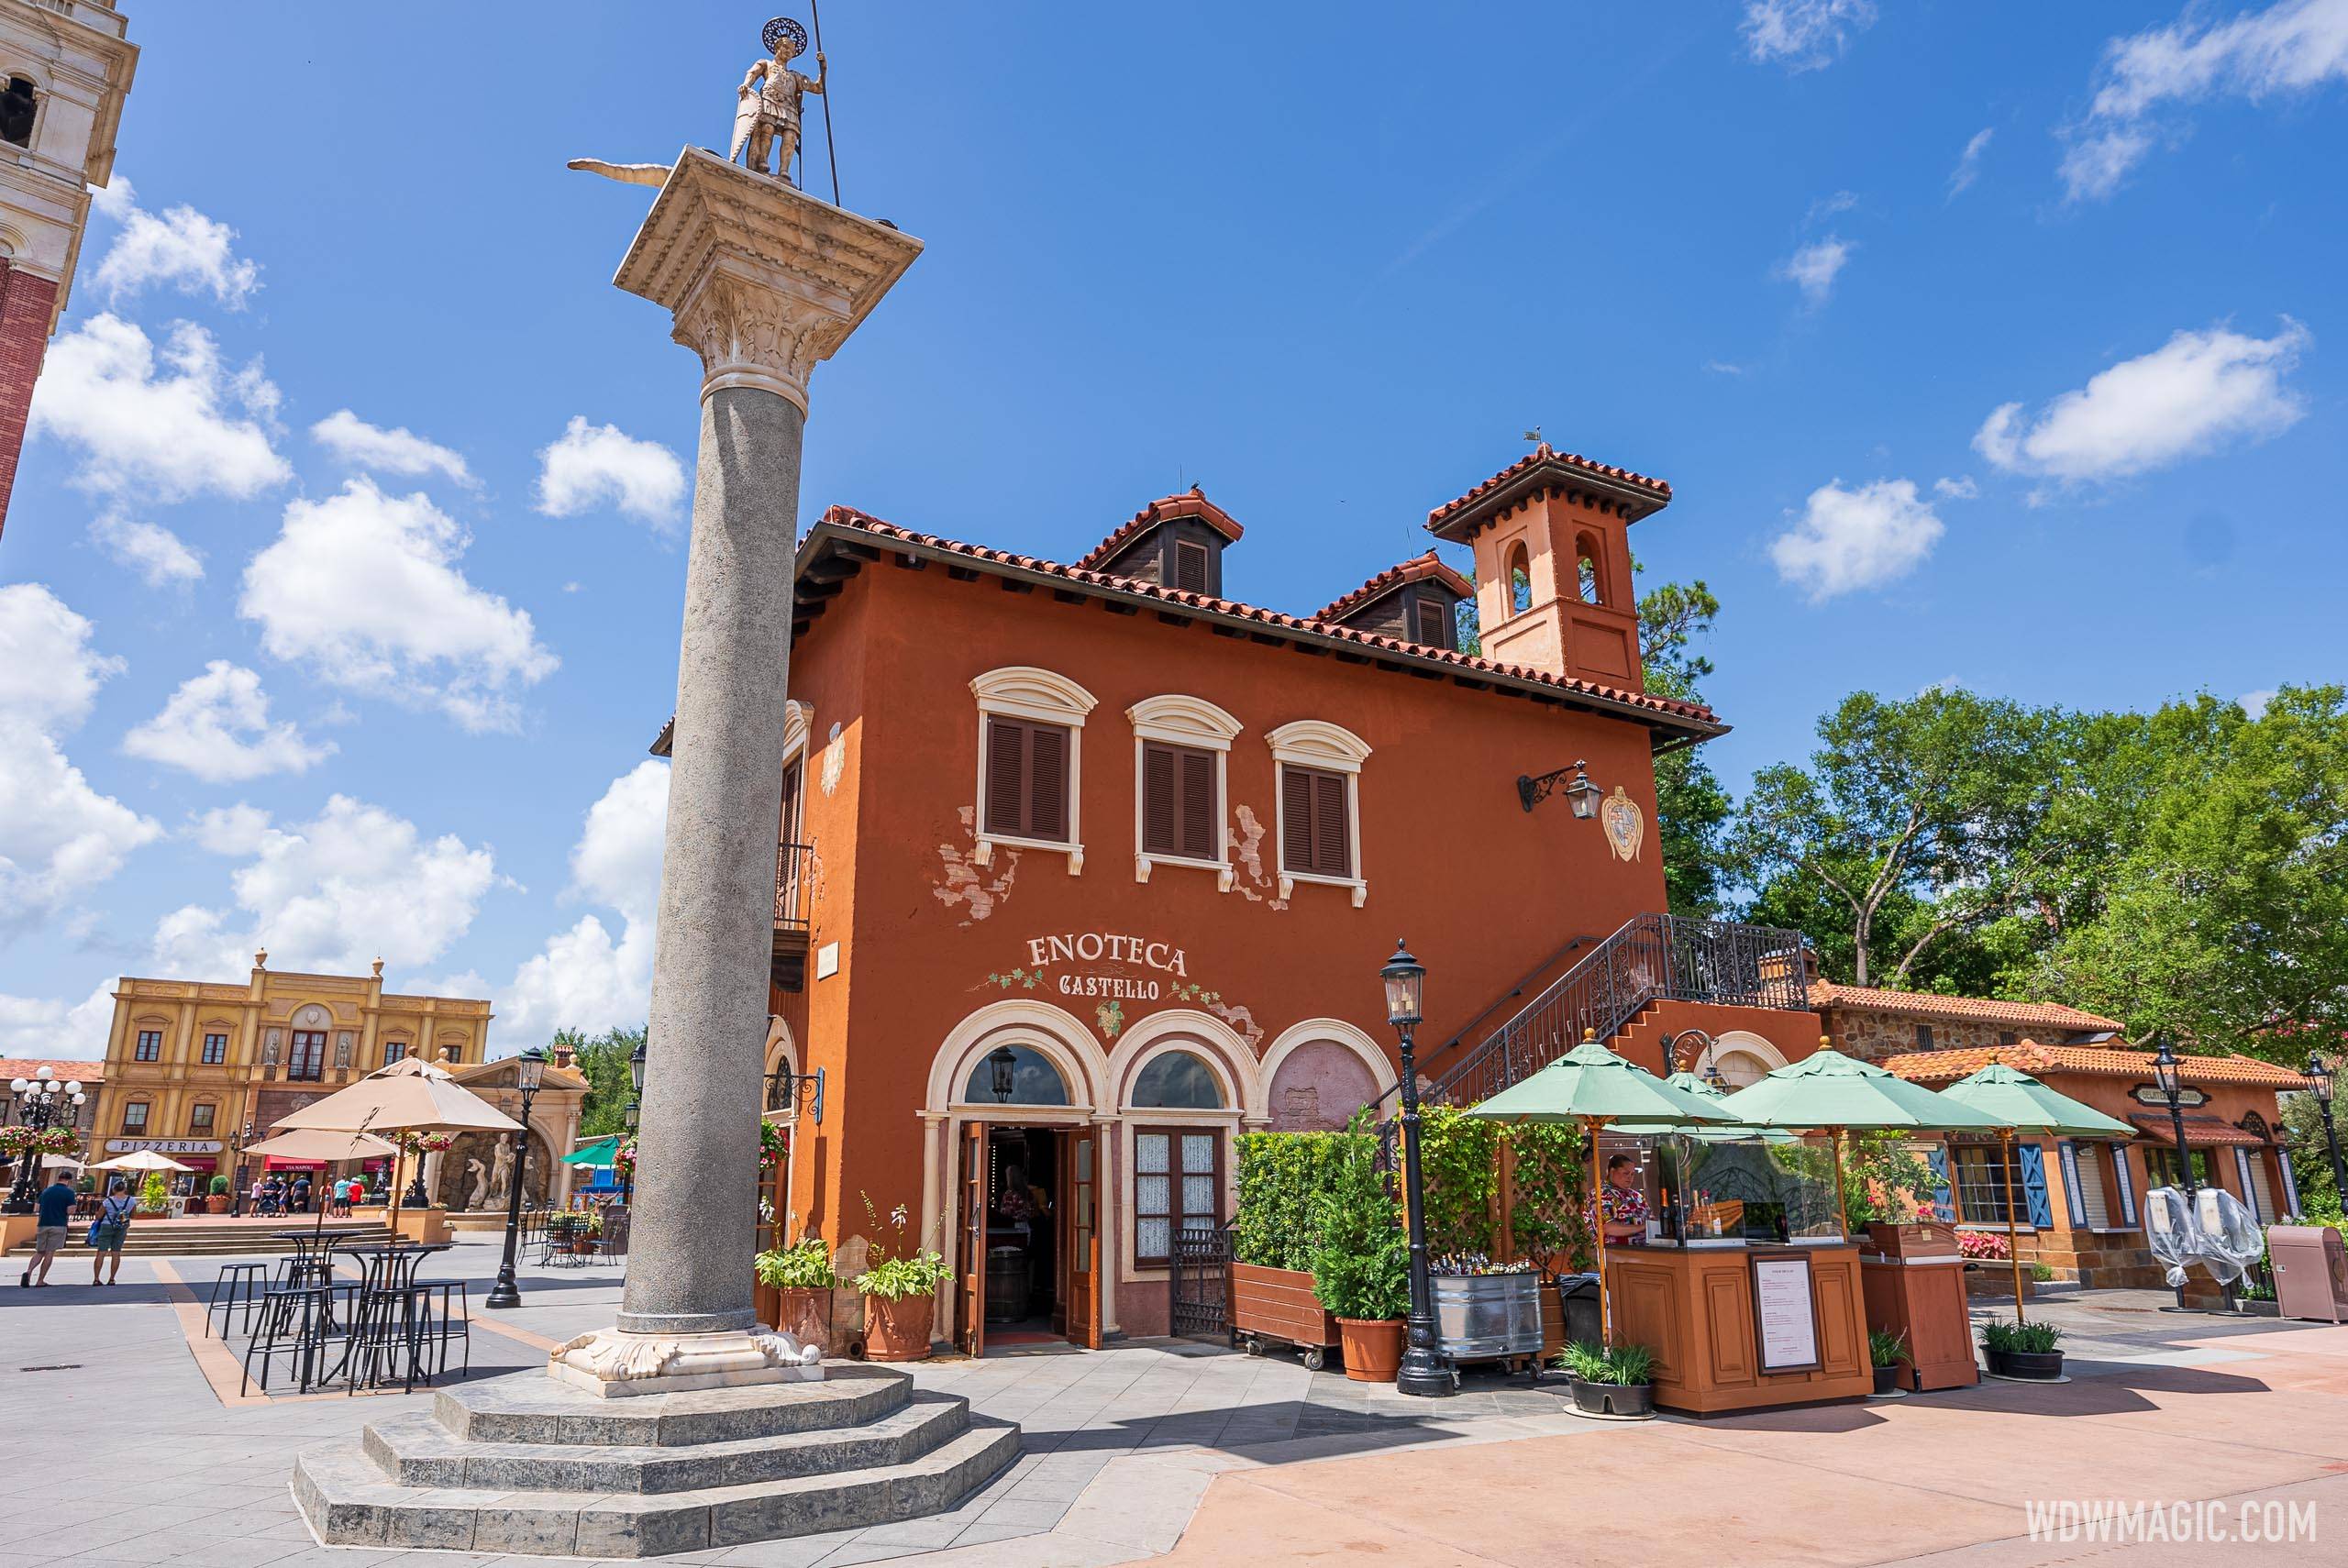 Italy Pavilion's Enoteca Castello at EPCOT repainted with a new look